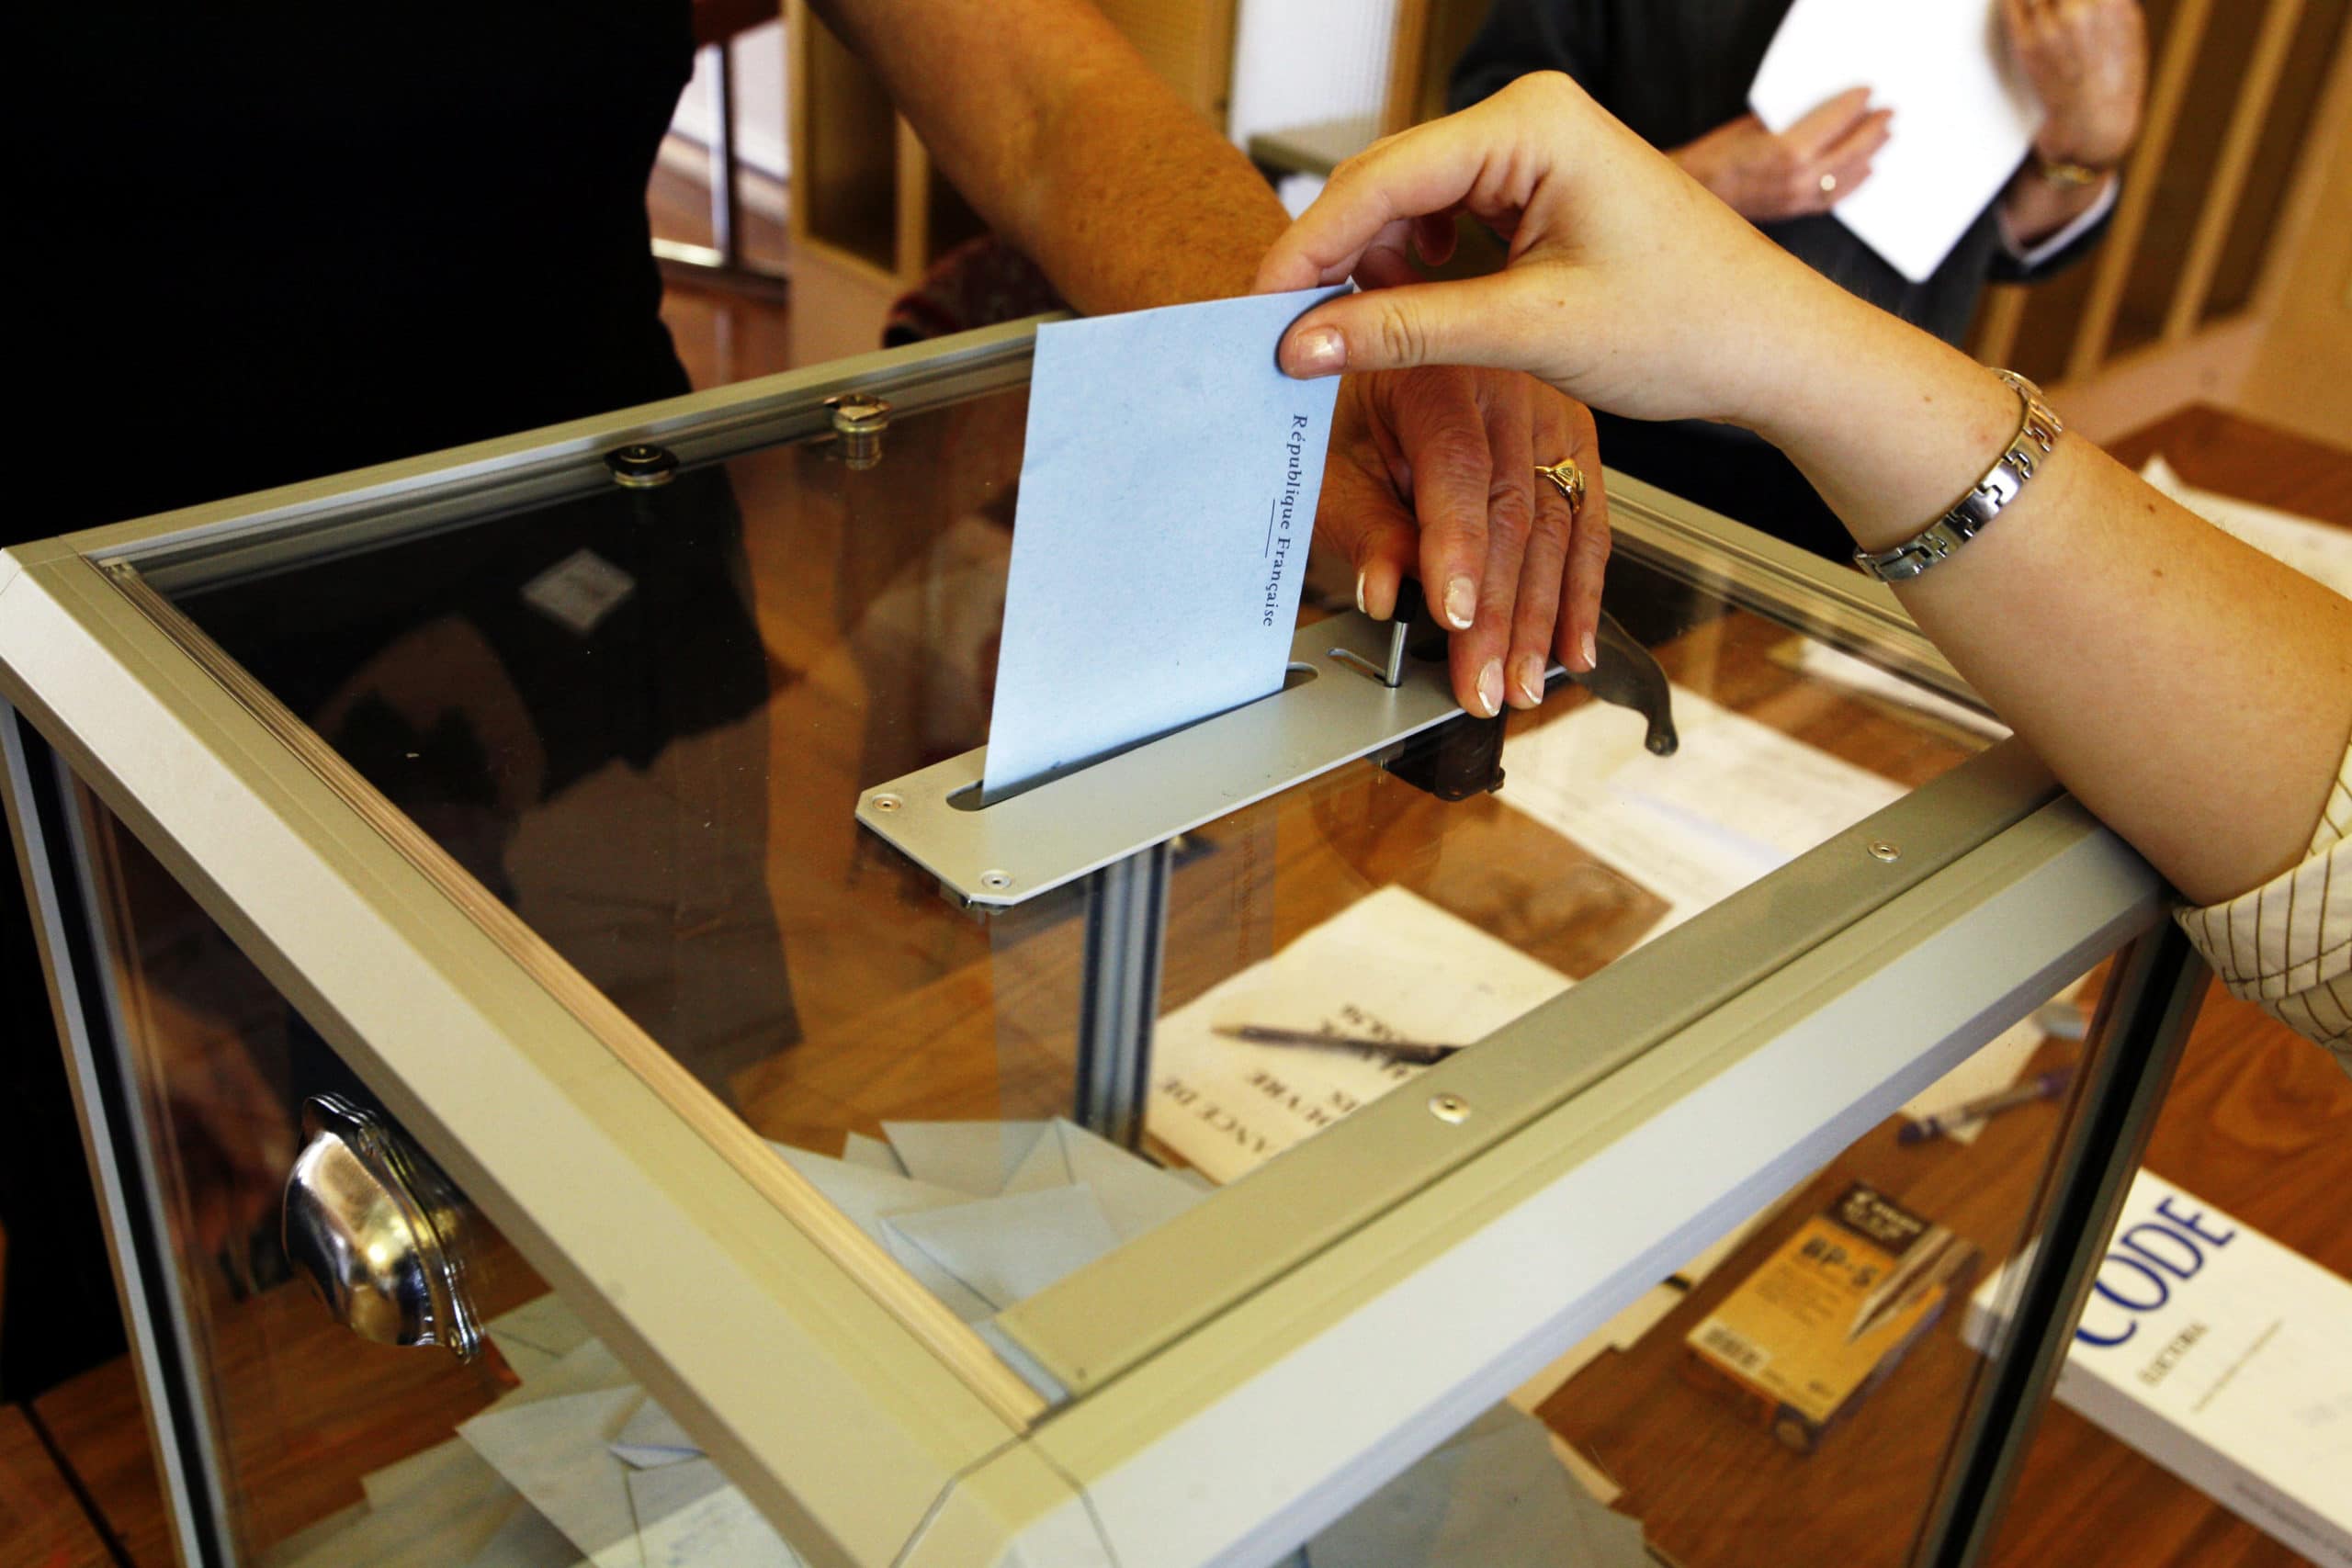 A hand places a ballot into a box. Local elections matter more than you may think!